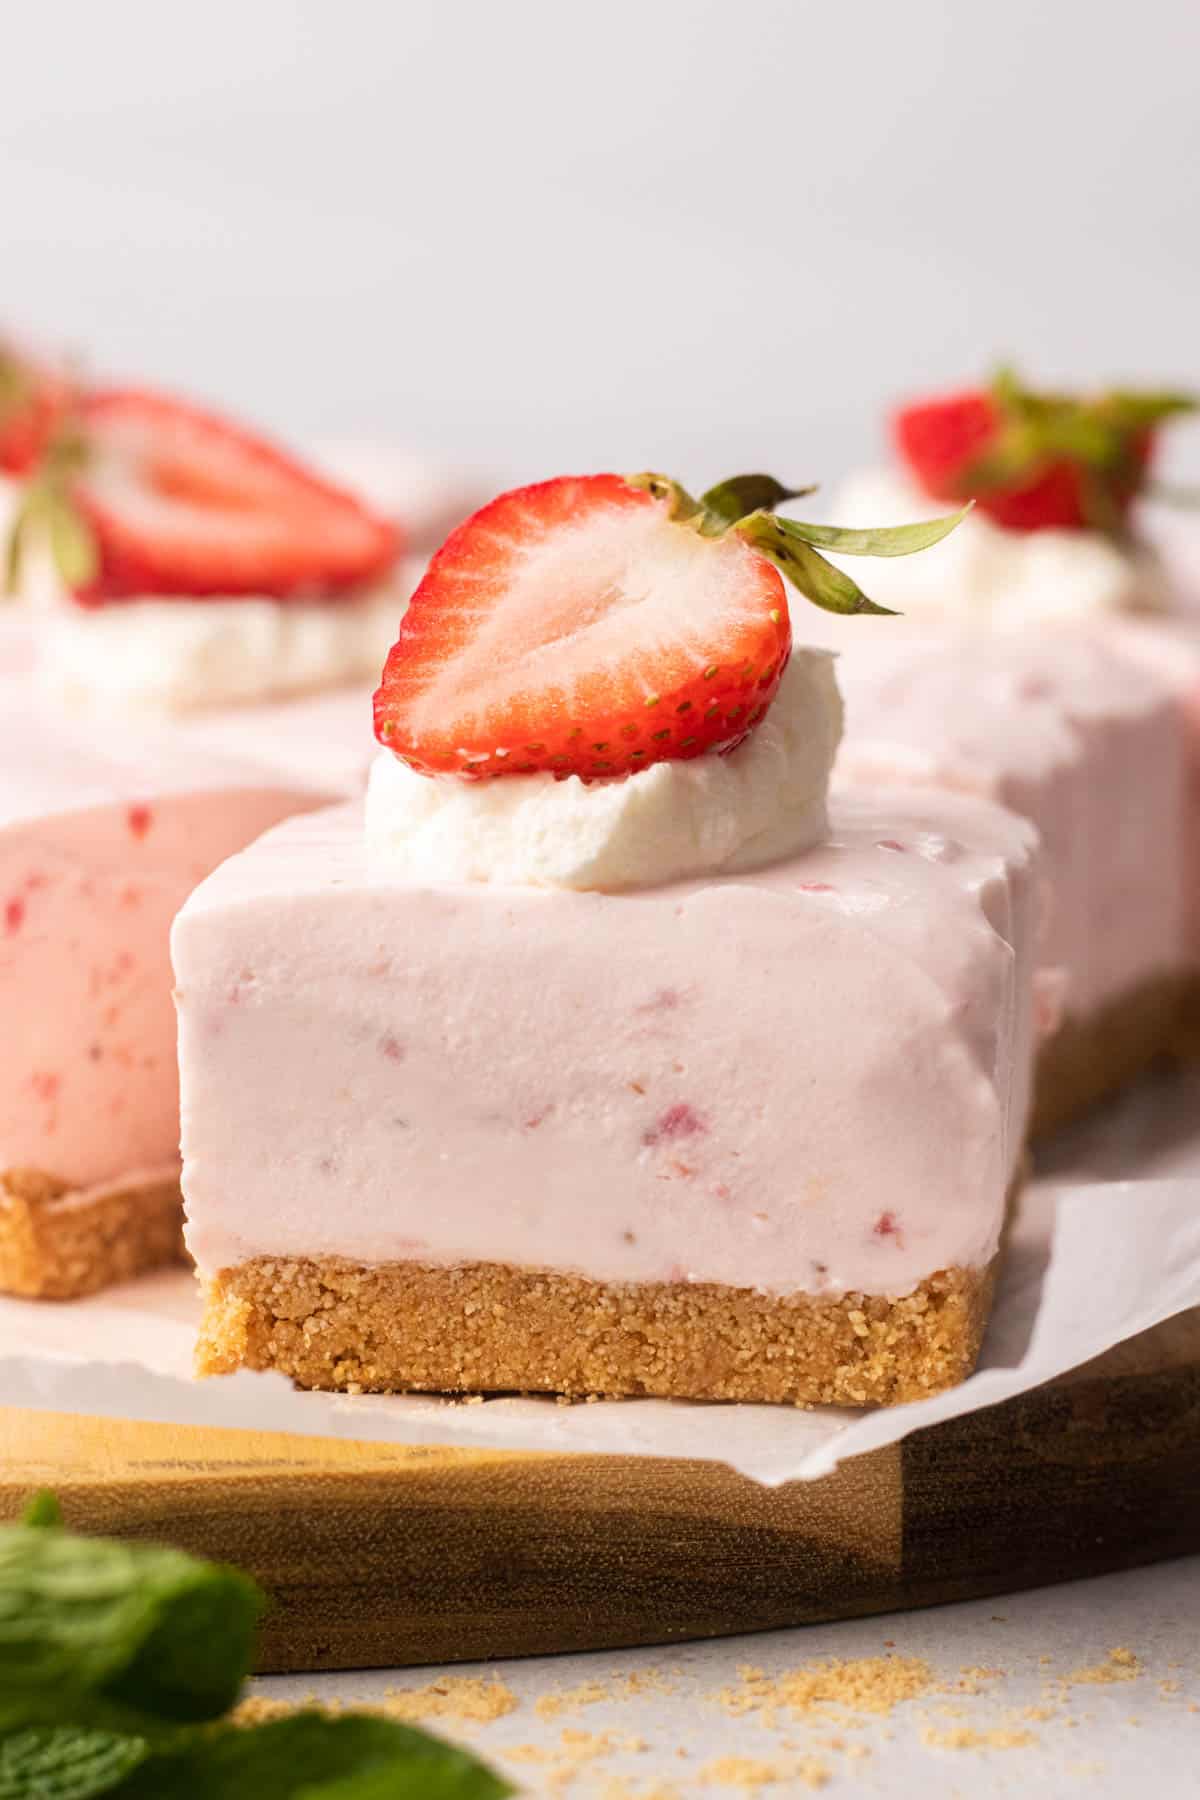 Strawberry cheesecake bar, topped with whipped cream and a strawberry.